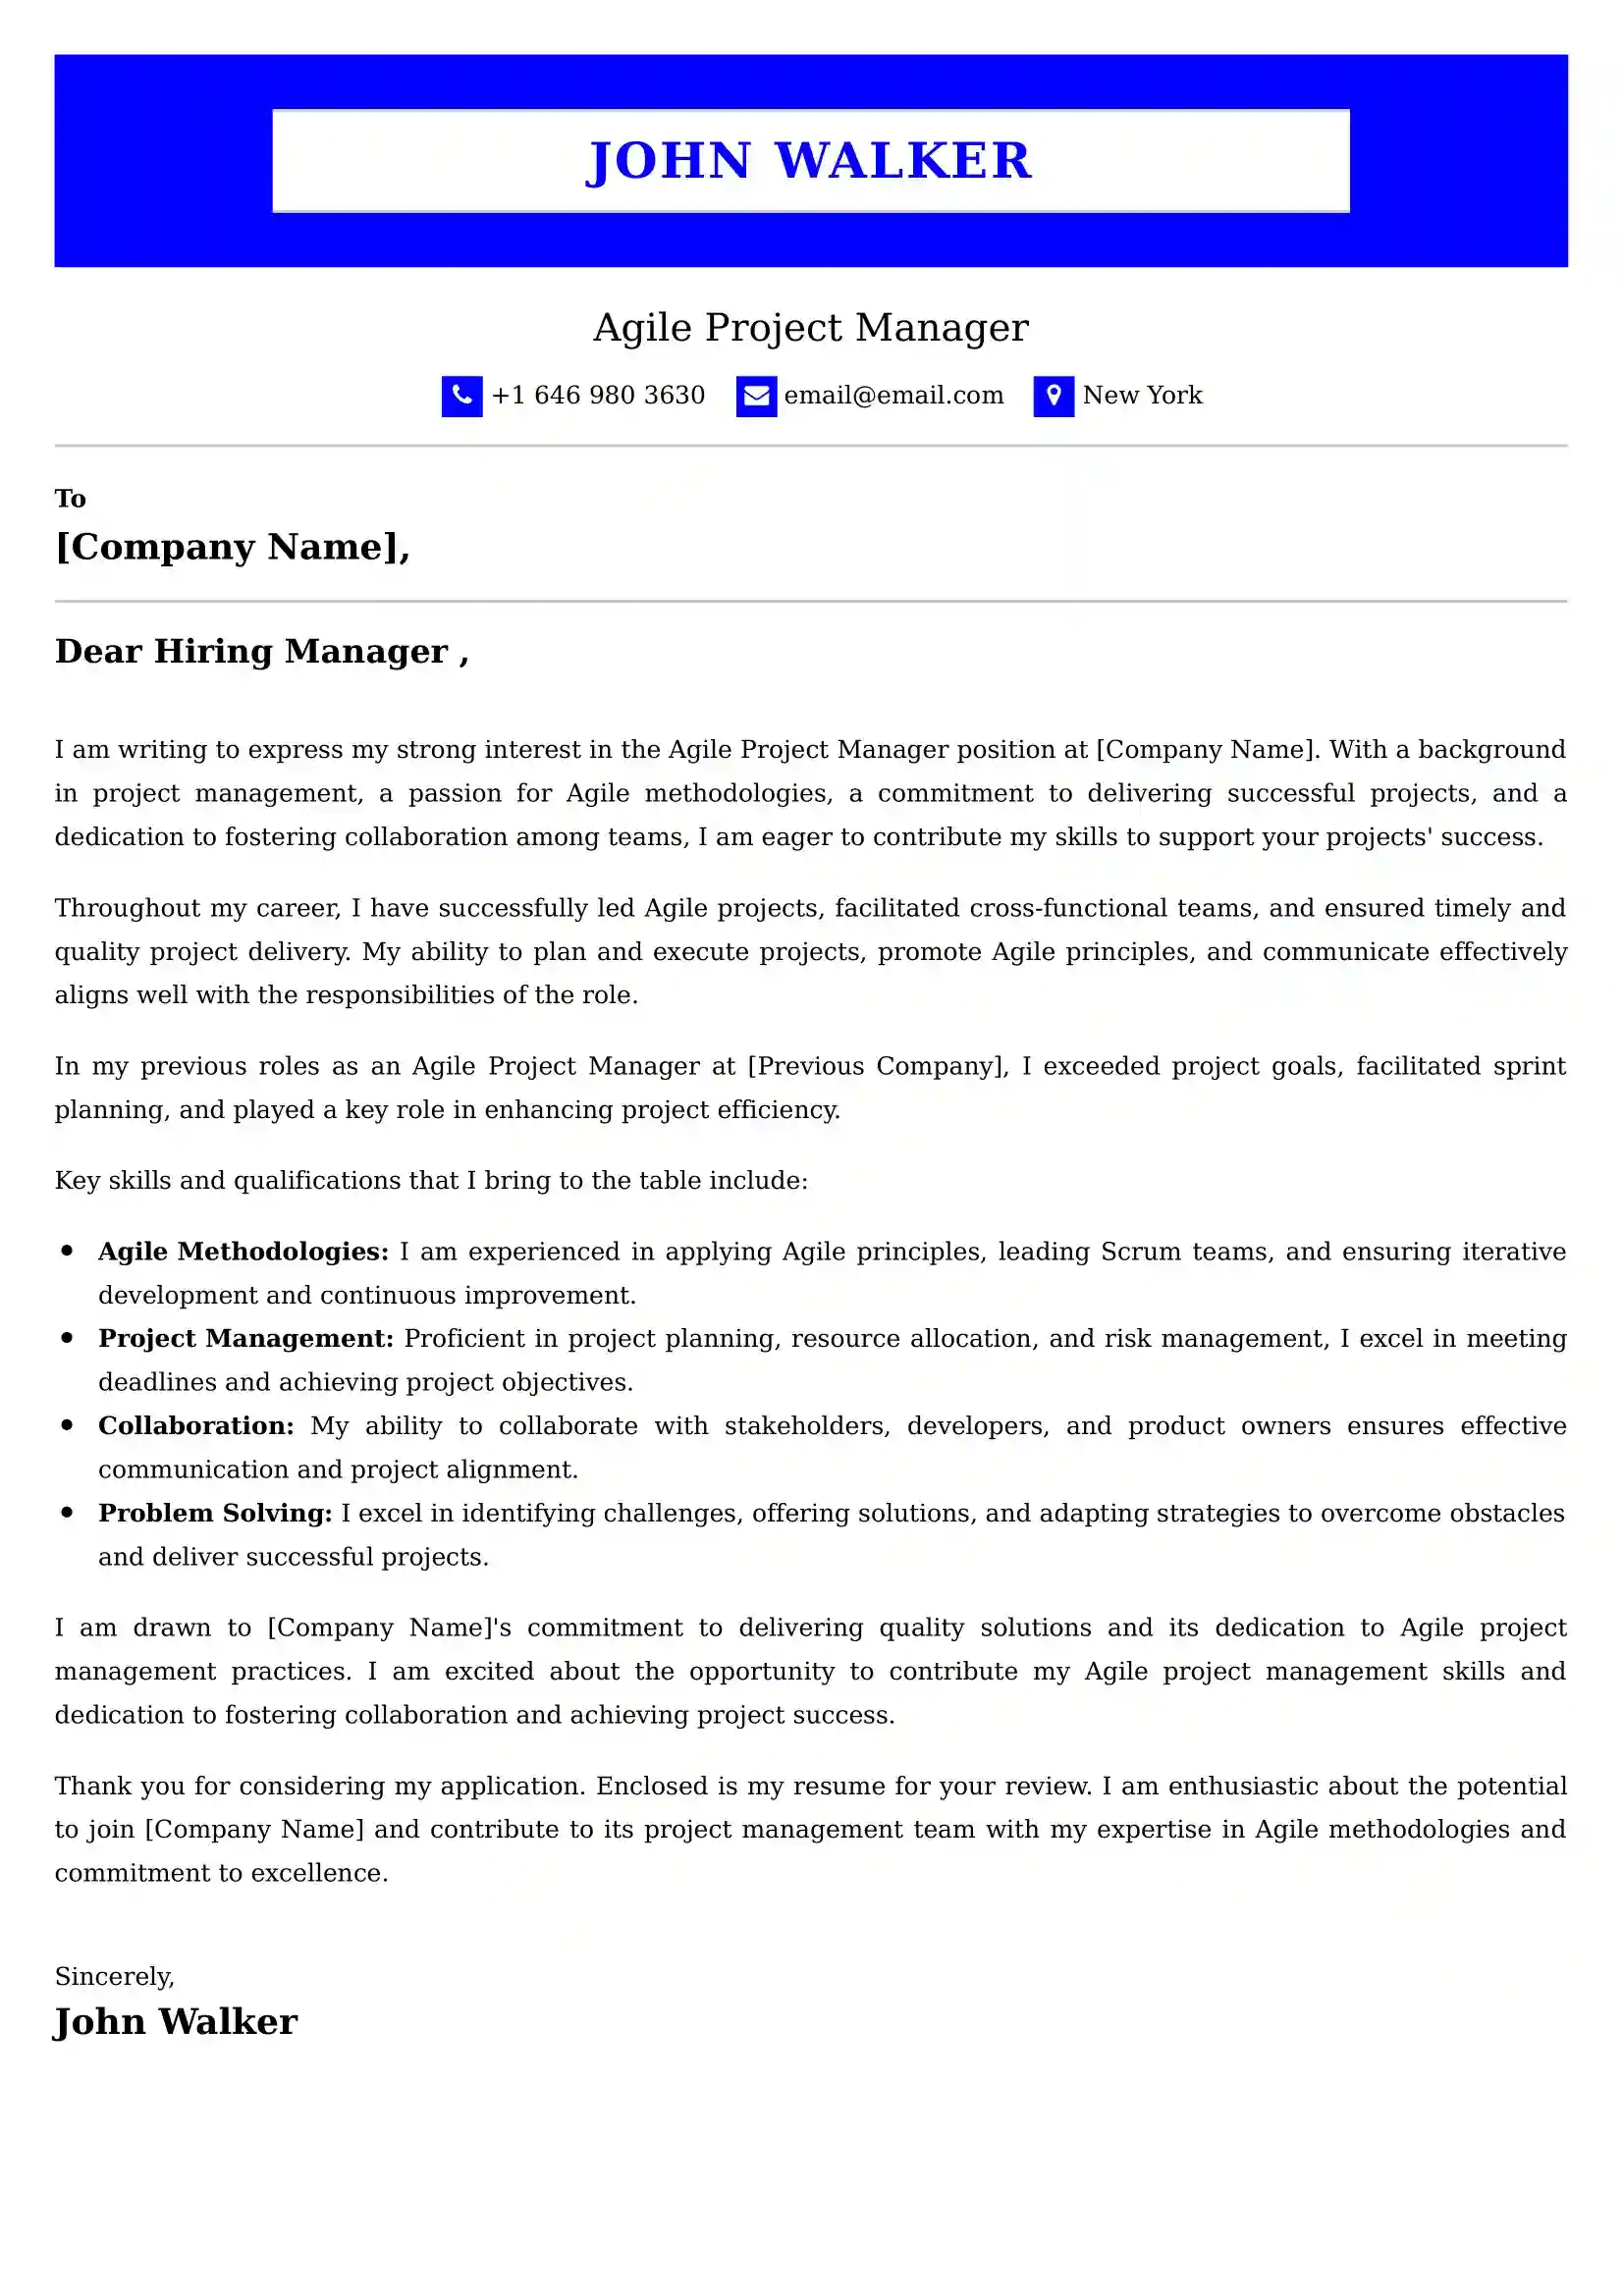 Agile Project Manager Cover Letter Examples - Latest UK Format